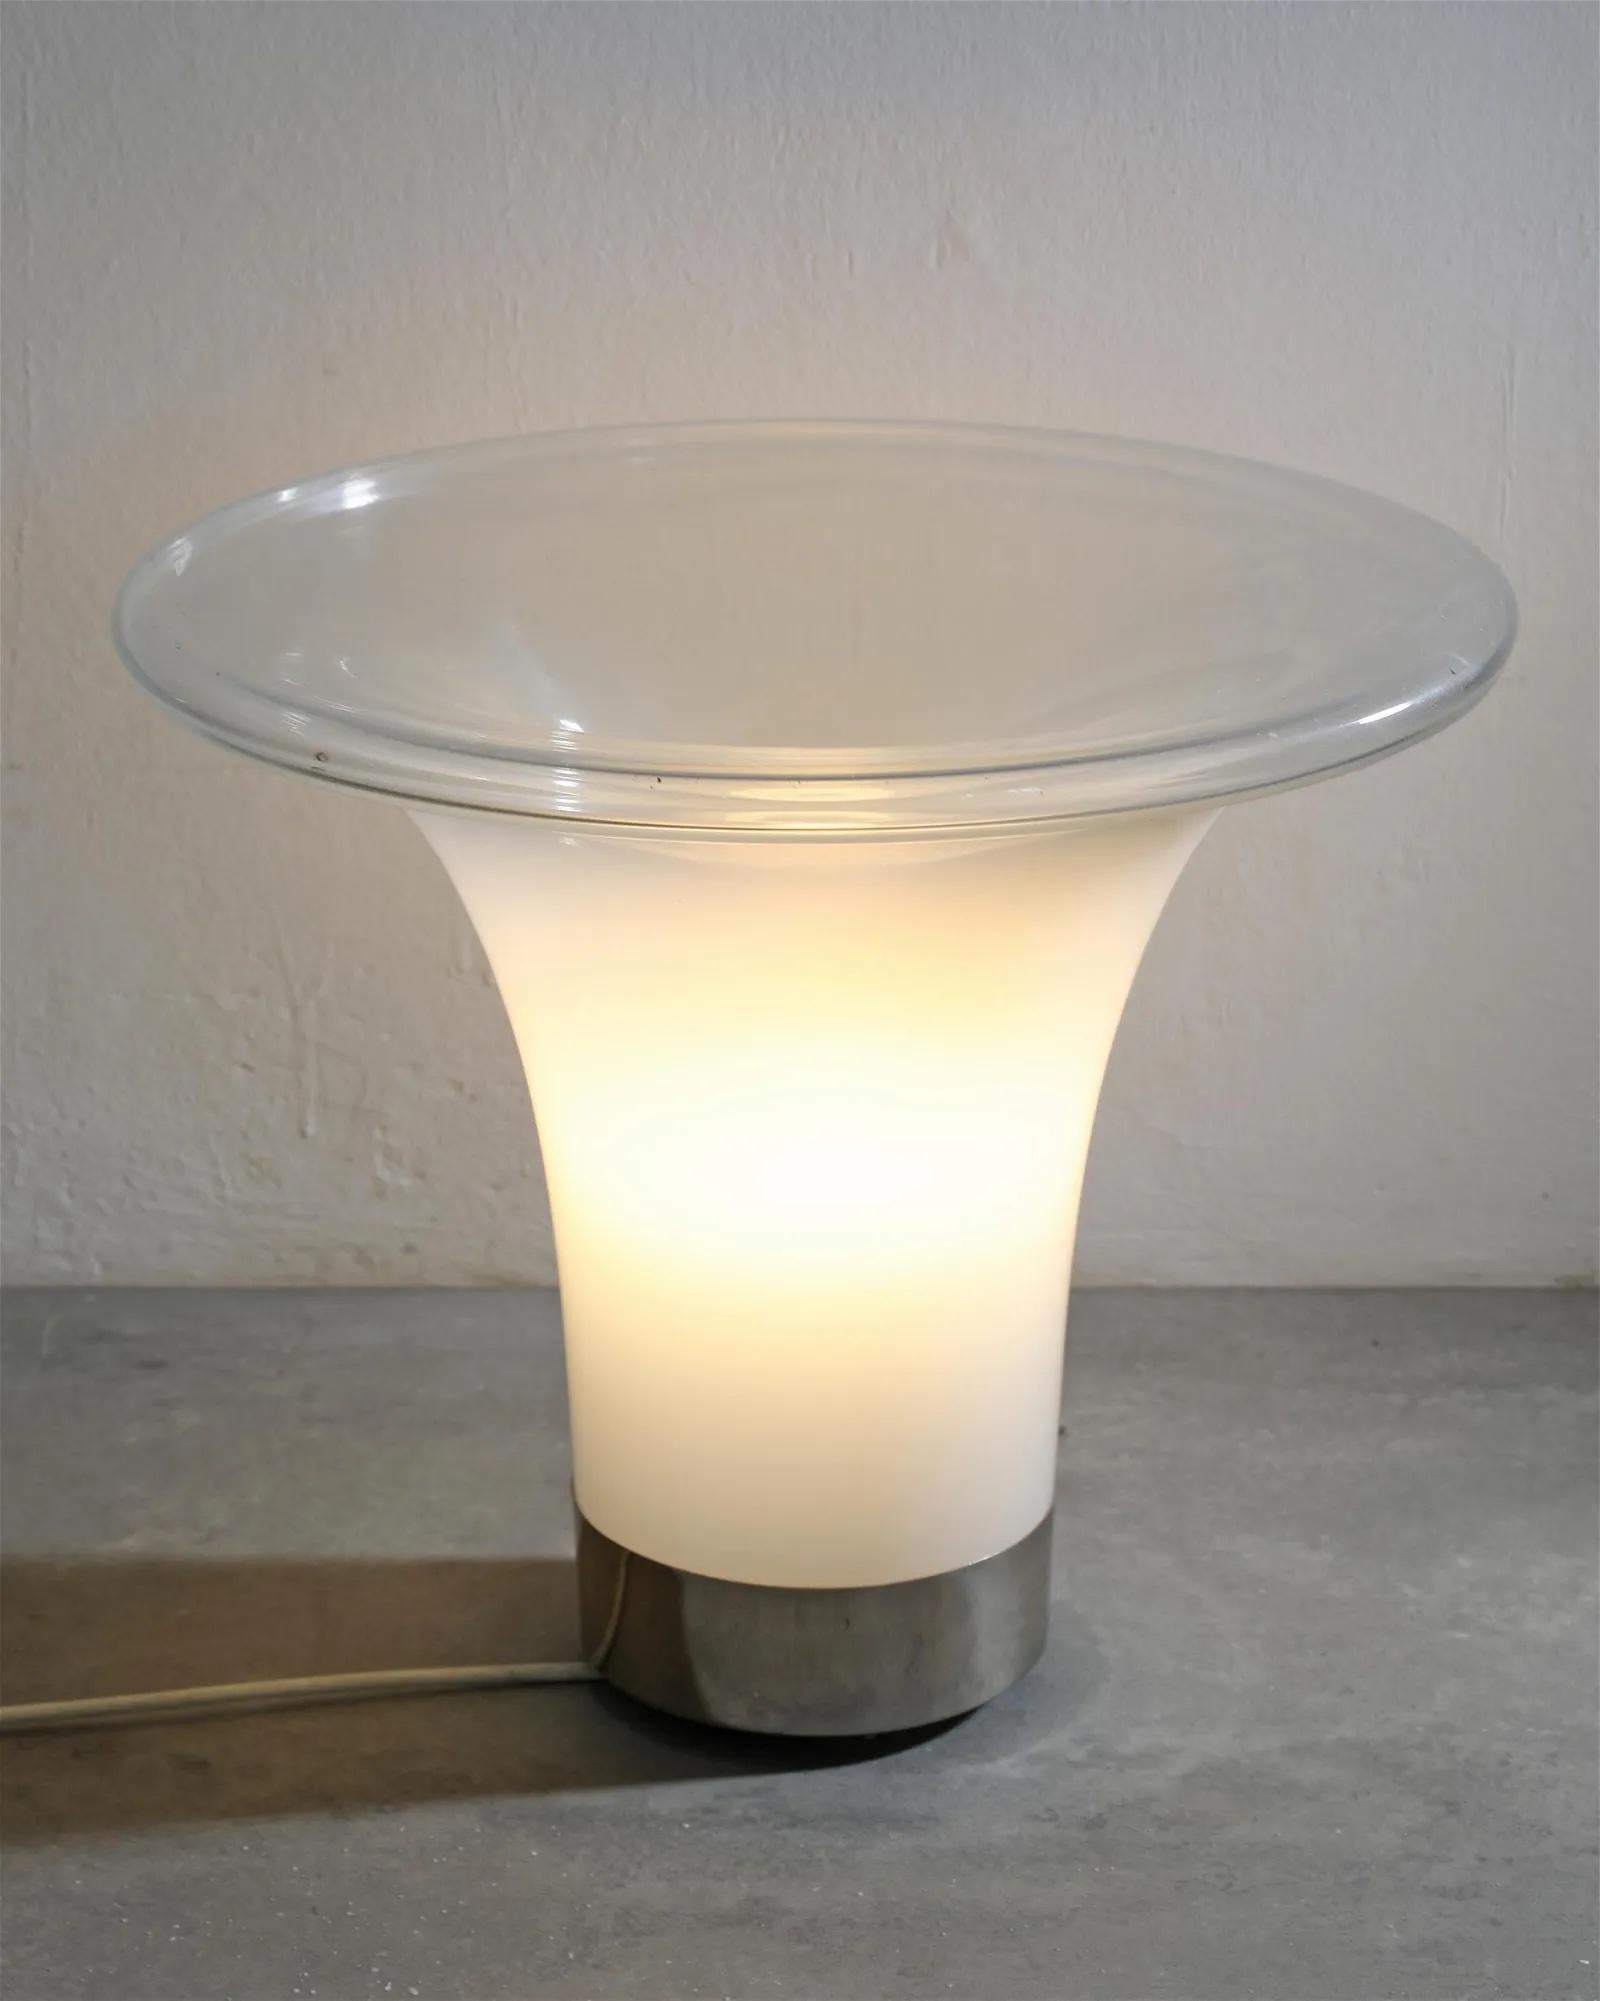 Comare by Vistosi features opaline glass and solid steel lamps. Designed in 1972.